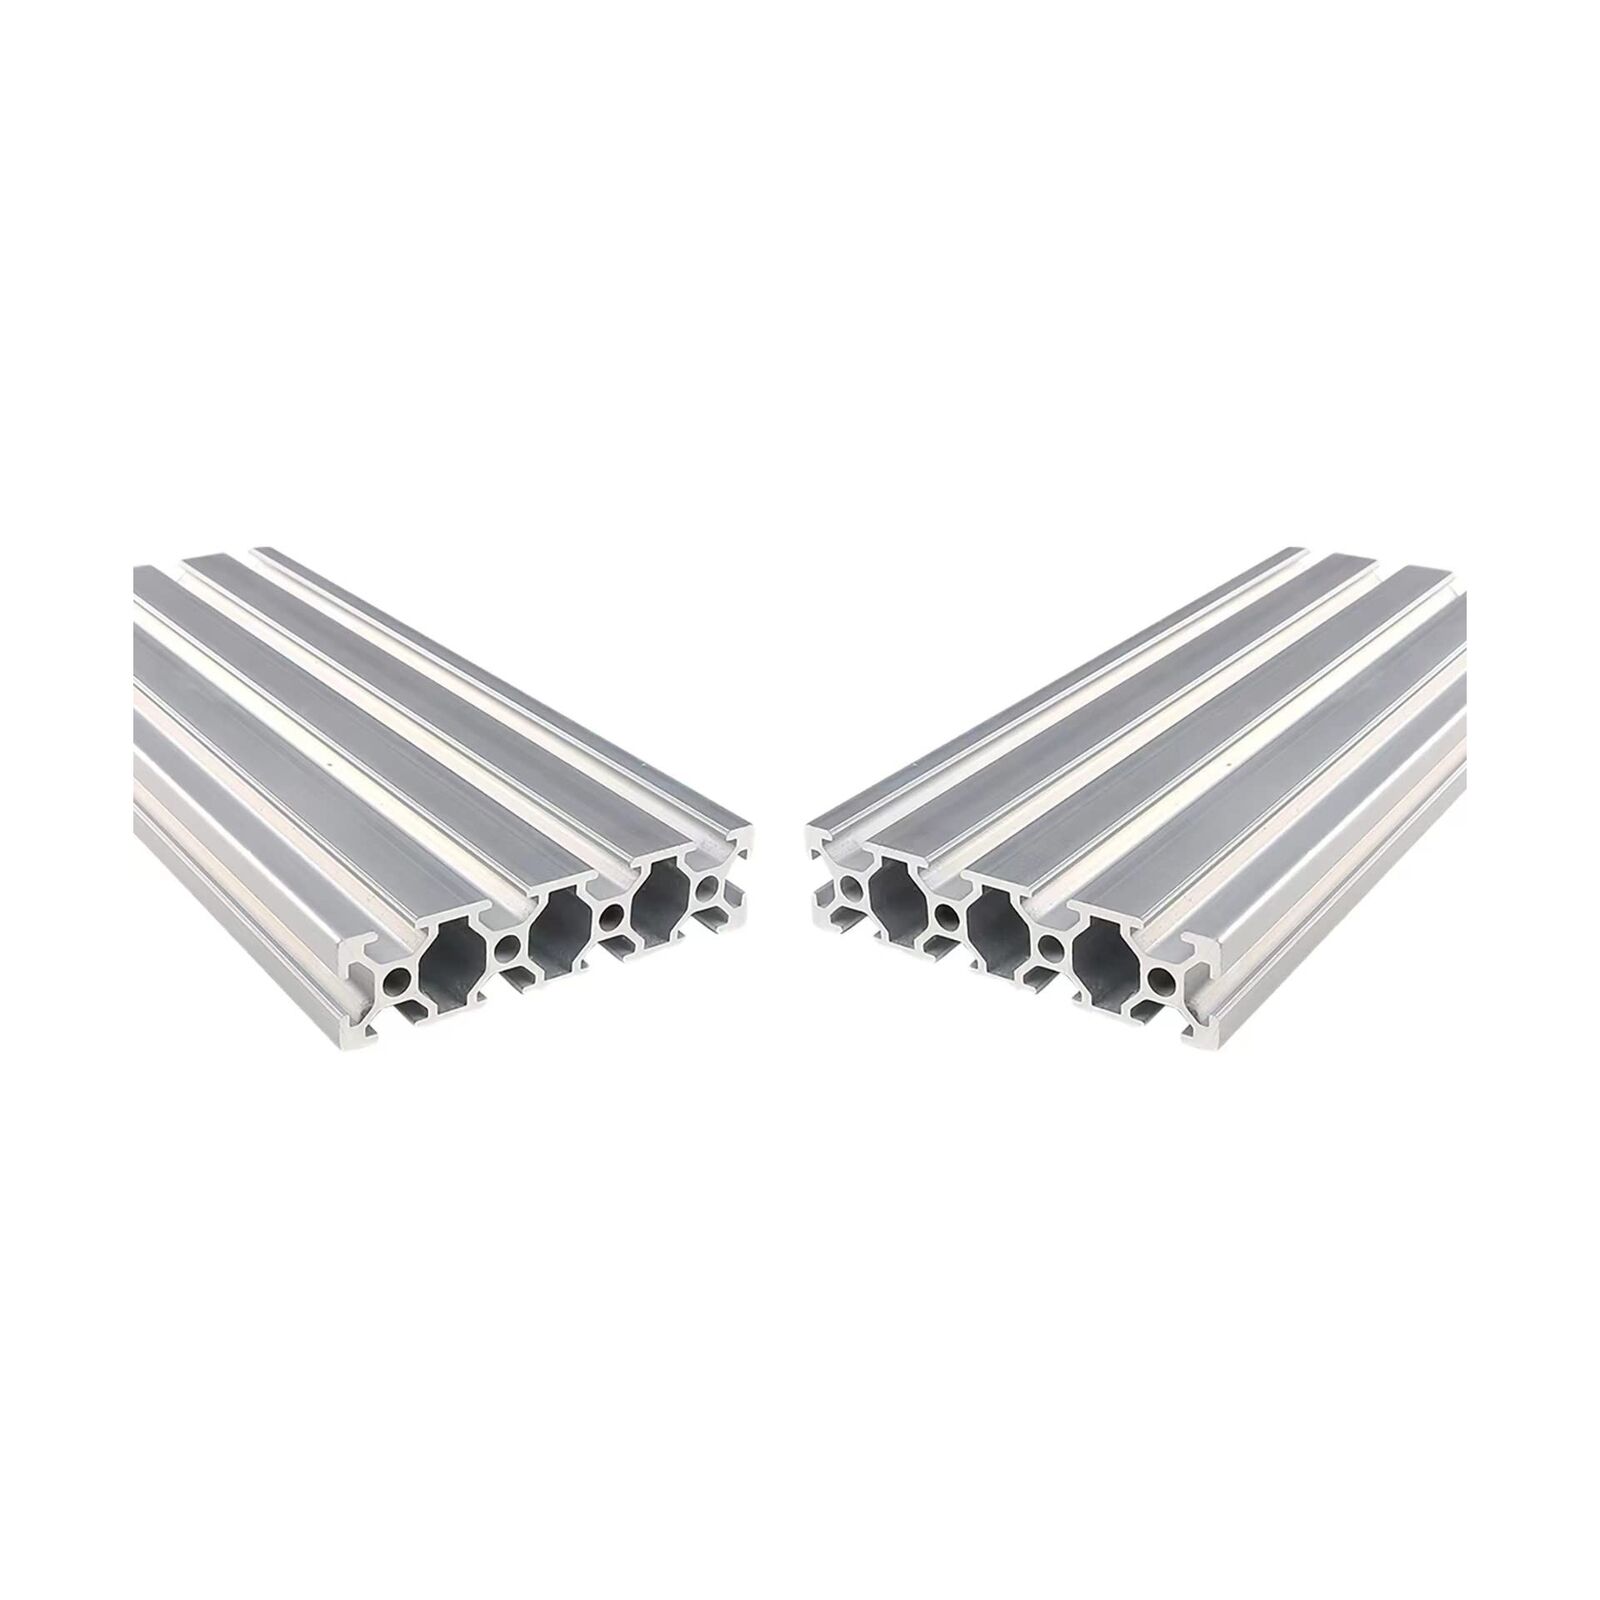 Coavoo 2080 Aluminum Extrusion 58.66 inch / 1490mm Length T Slot Silver 2 Pac...